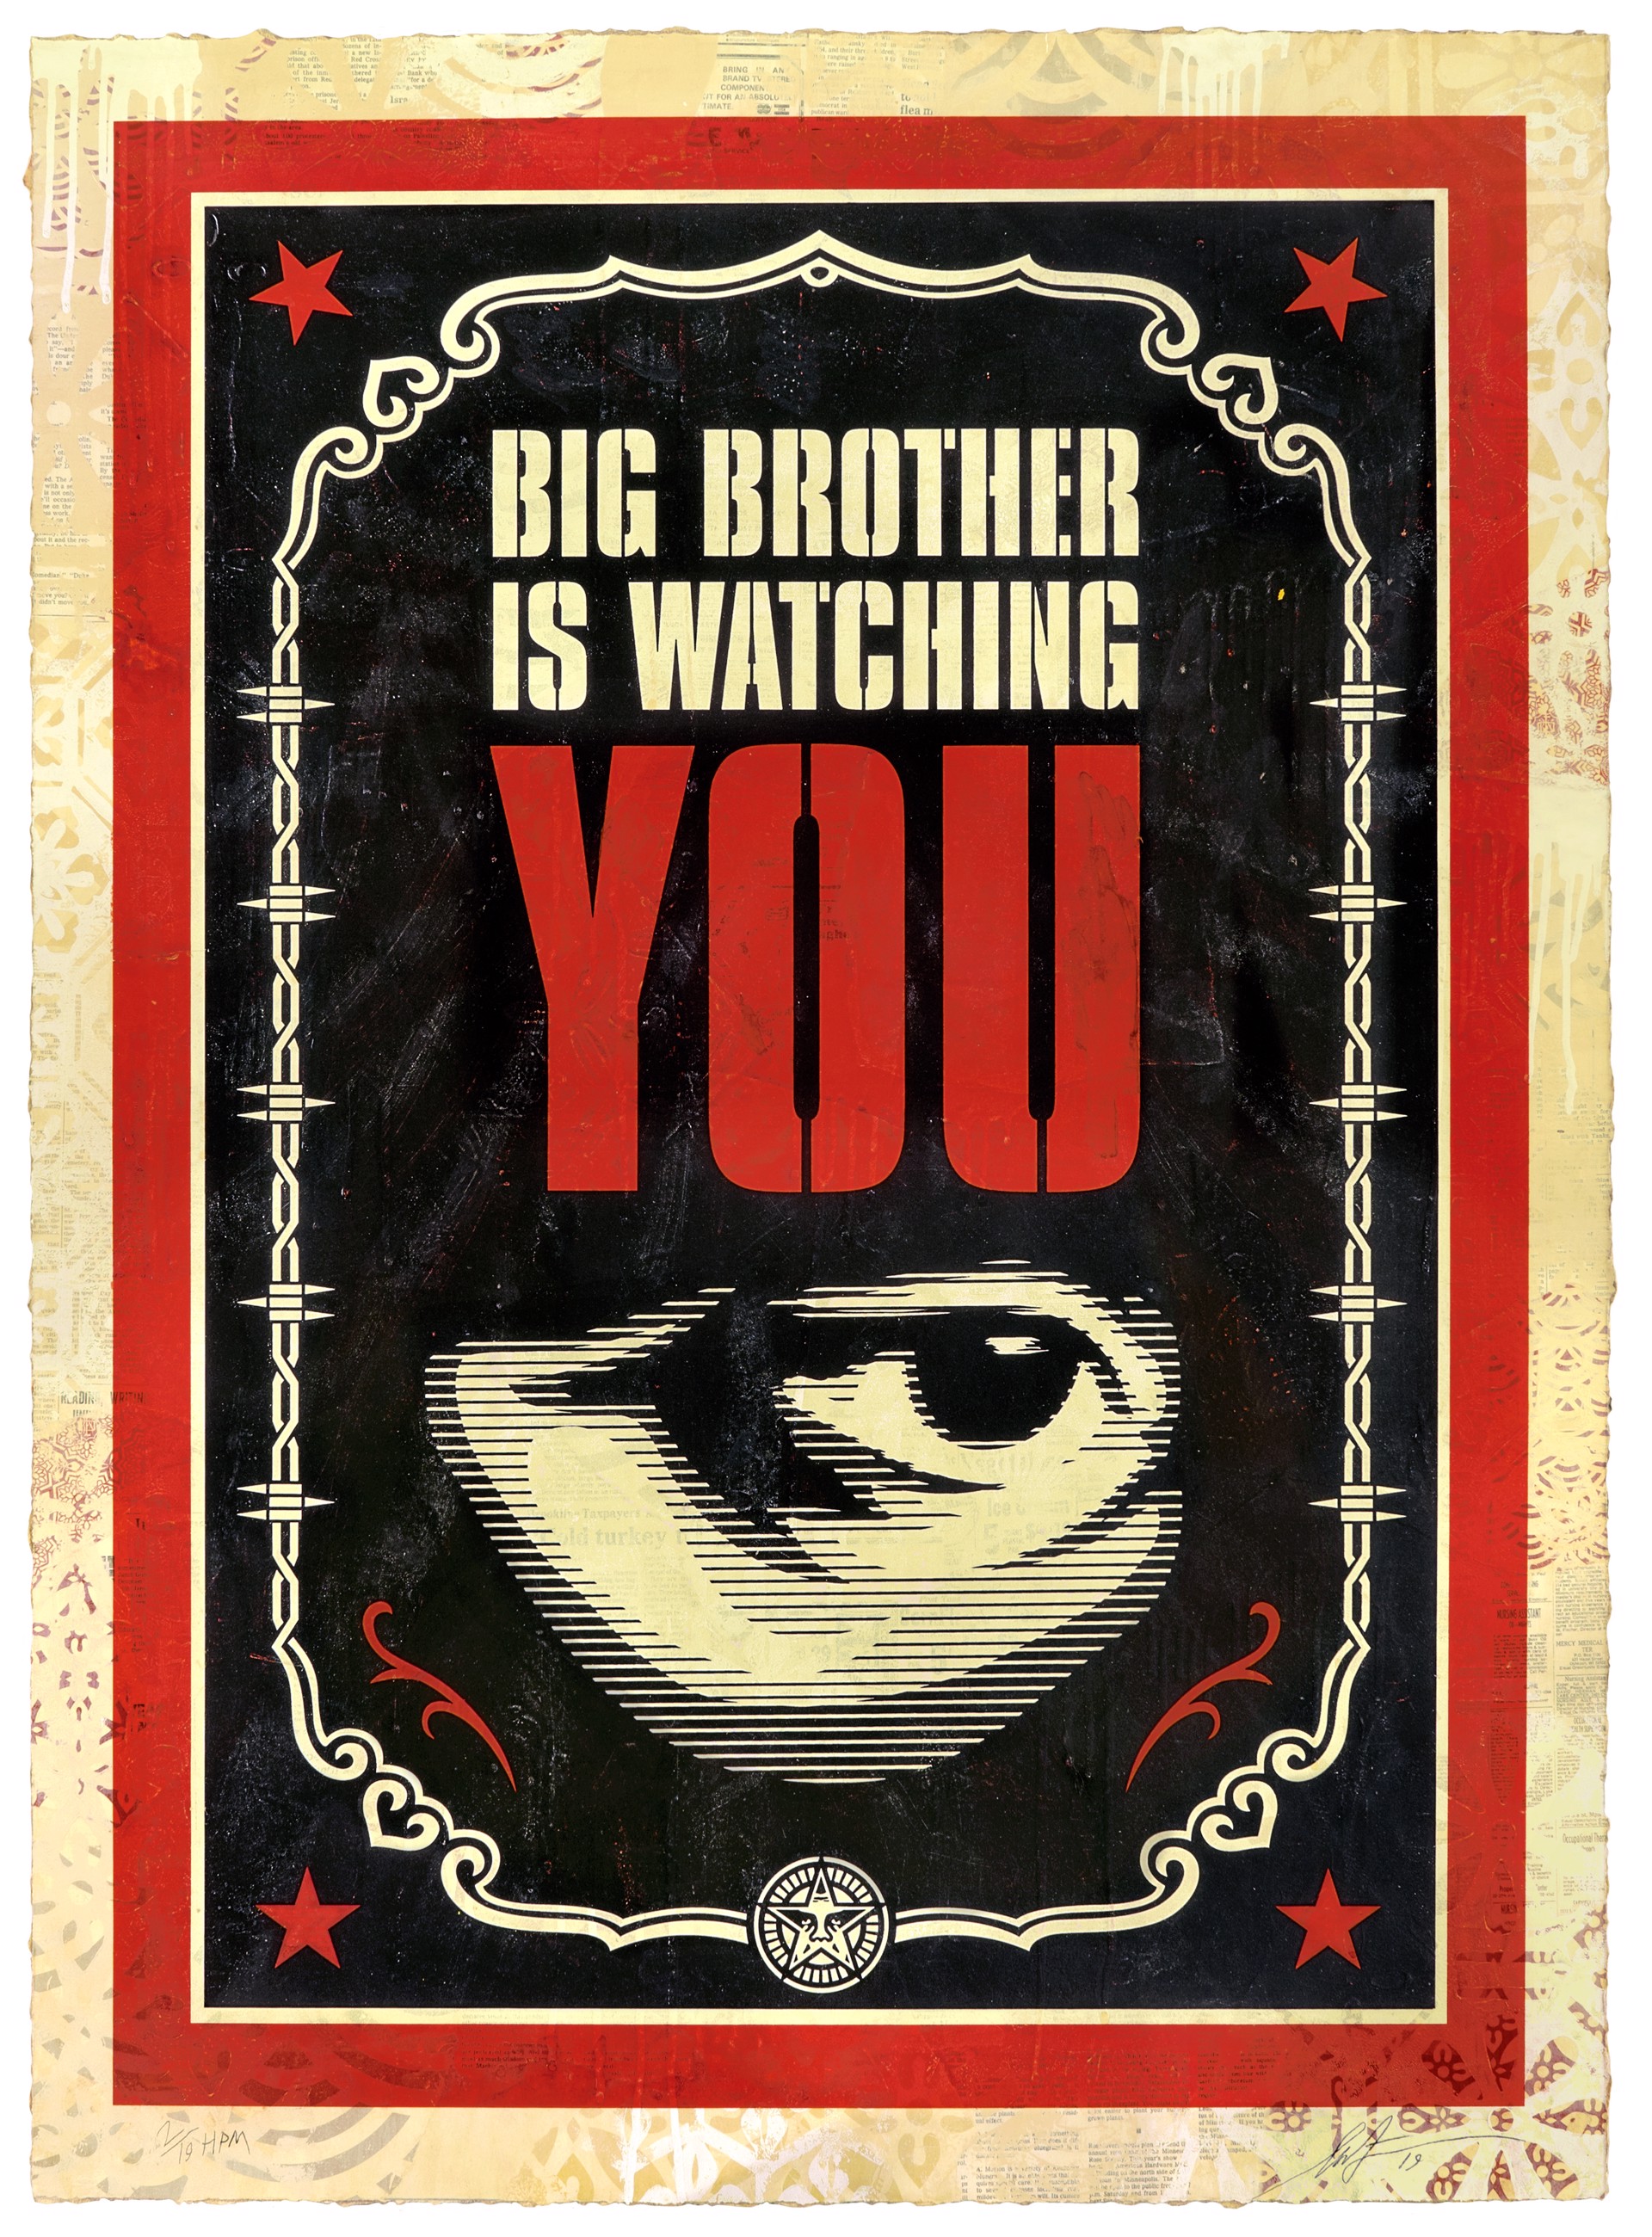 Big Brother Is Watching You, HPM by Shepard Fairey